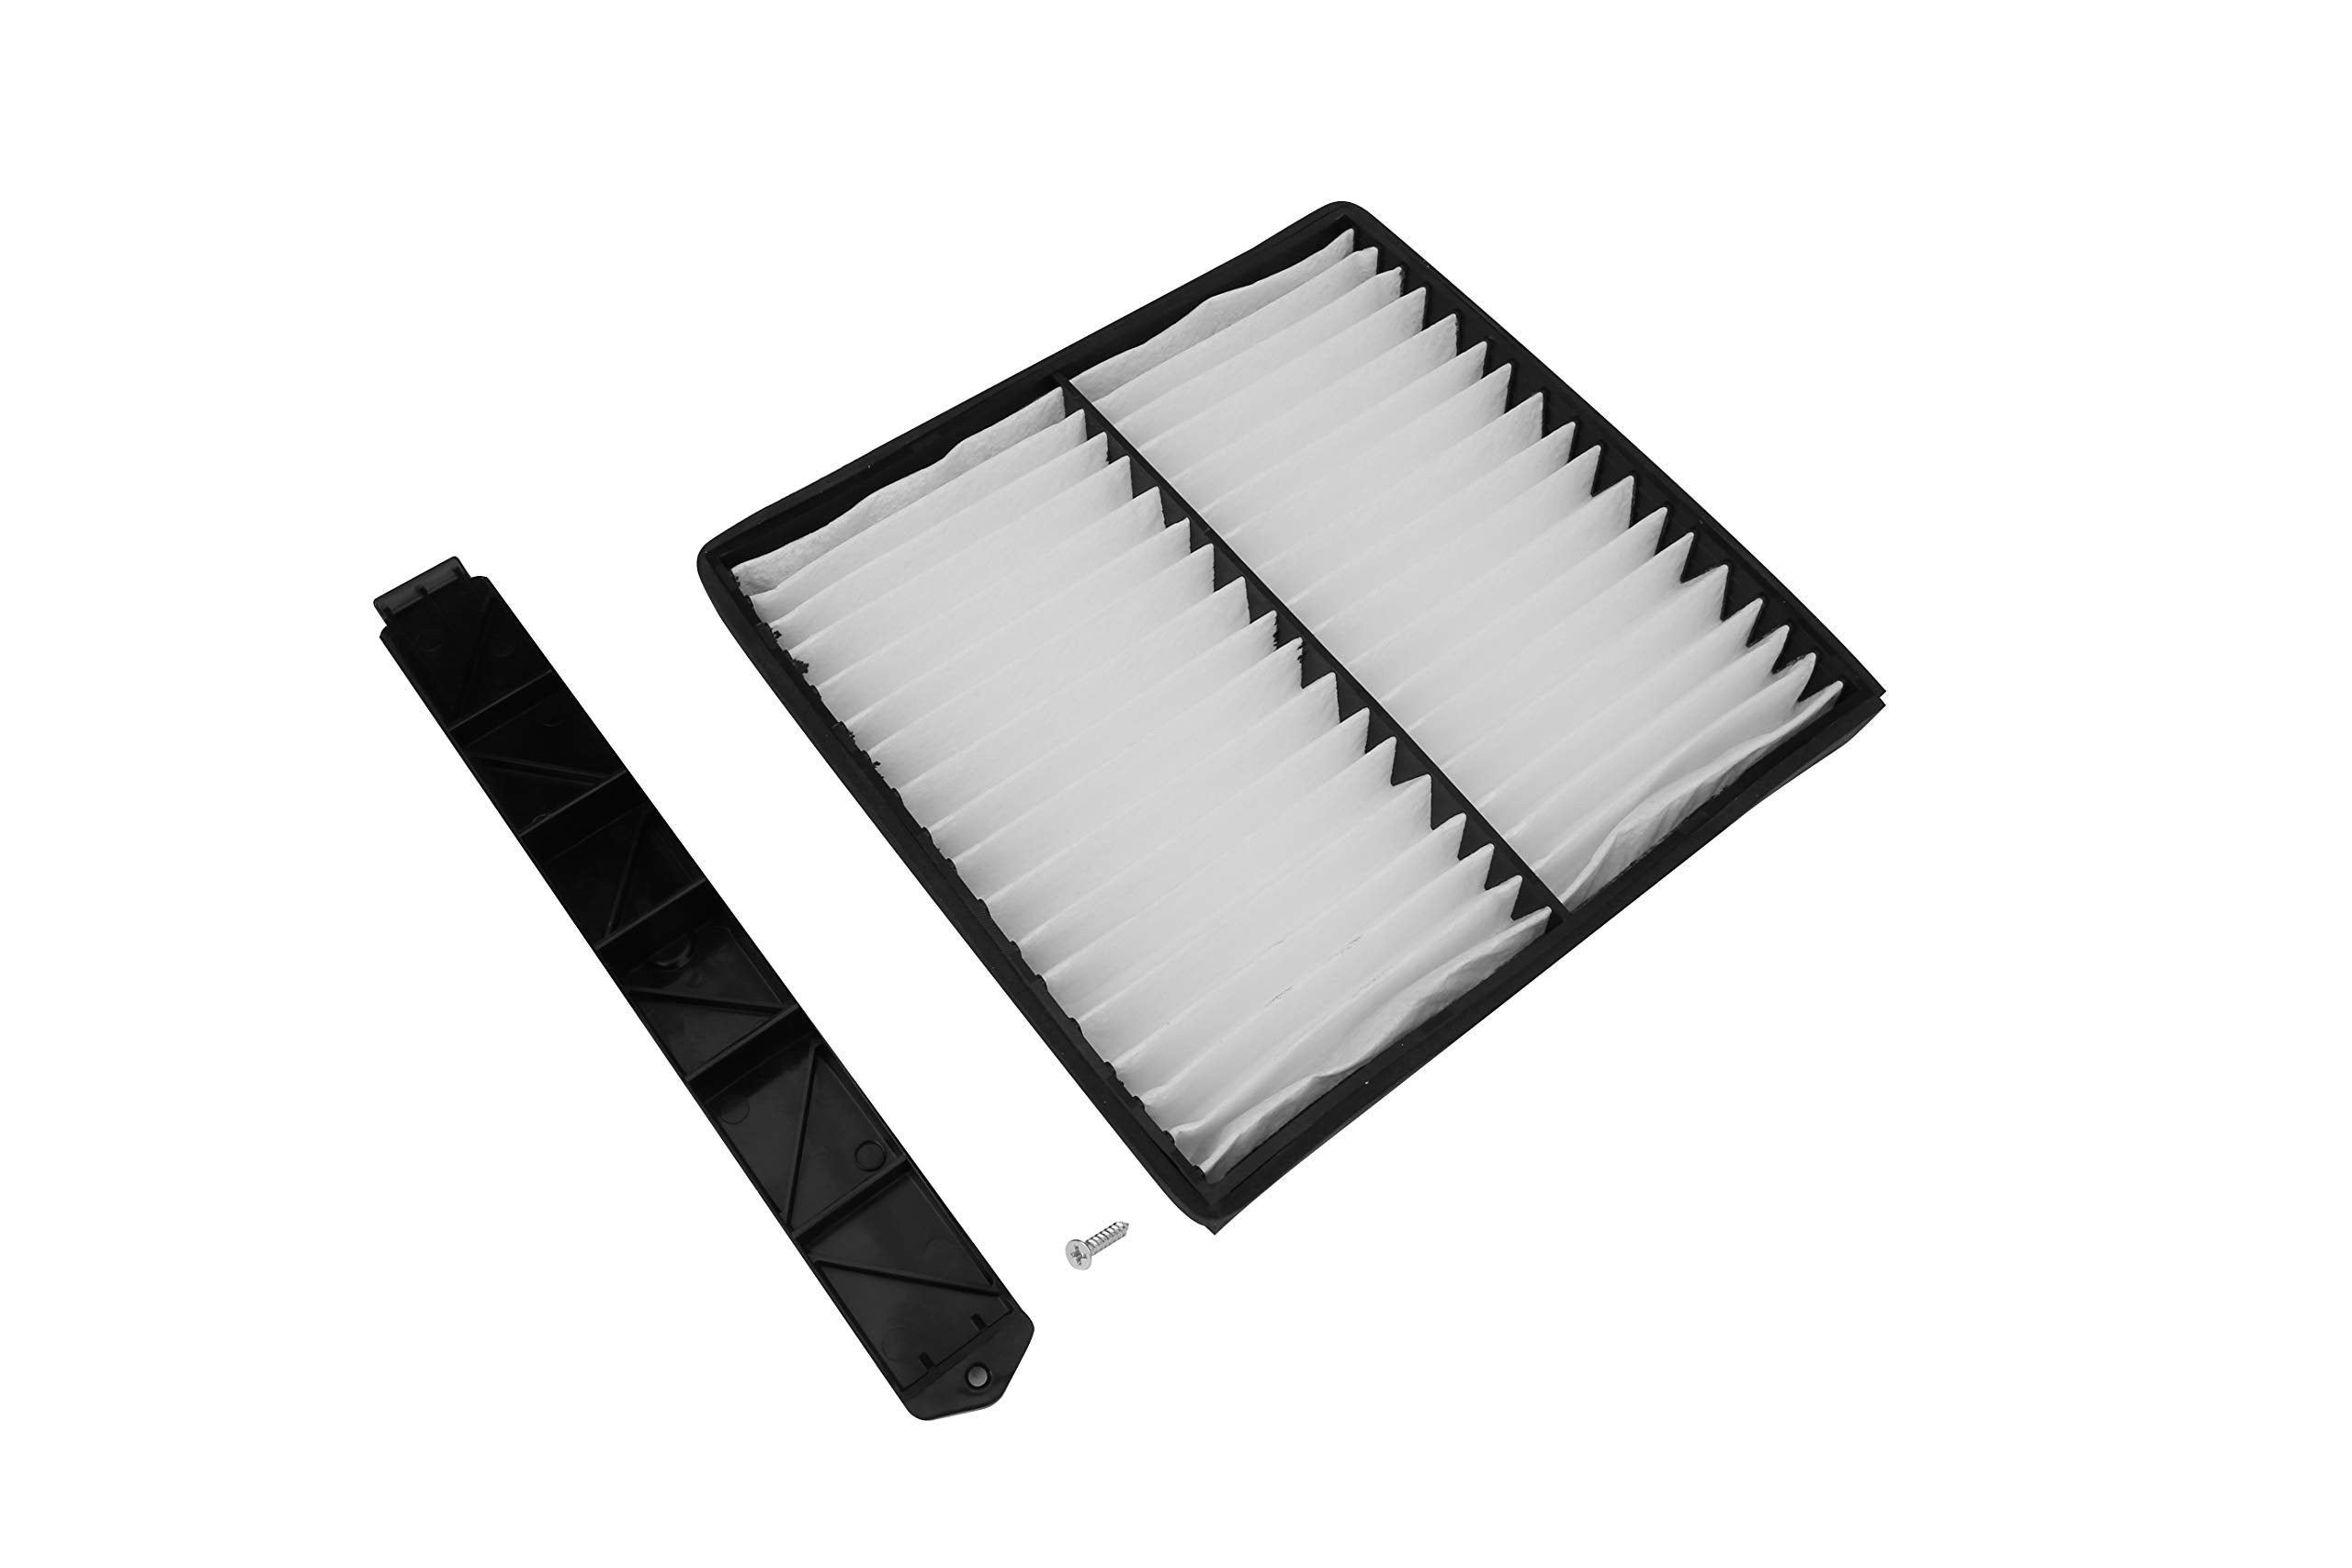 Cabin Air Filter Retrofit Kit - Compatible with Chevy, Cadillac and GMC Vehicles - Silverado, Sierra, Yukon, Tahoe, Suburban, Avalanche, Escalade - Replaces 259-200, 22759203, 103948, 22759208  - Like New